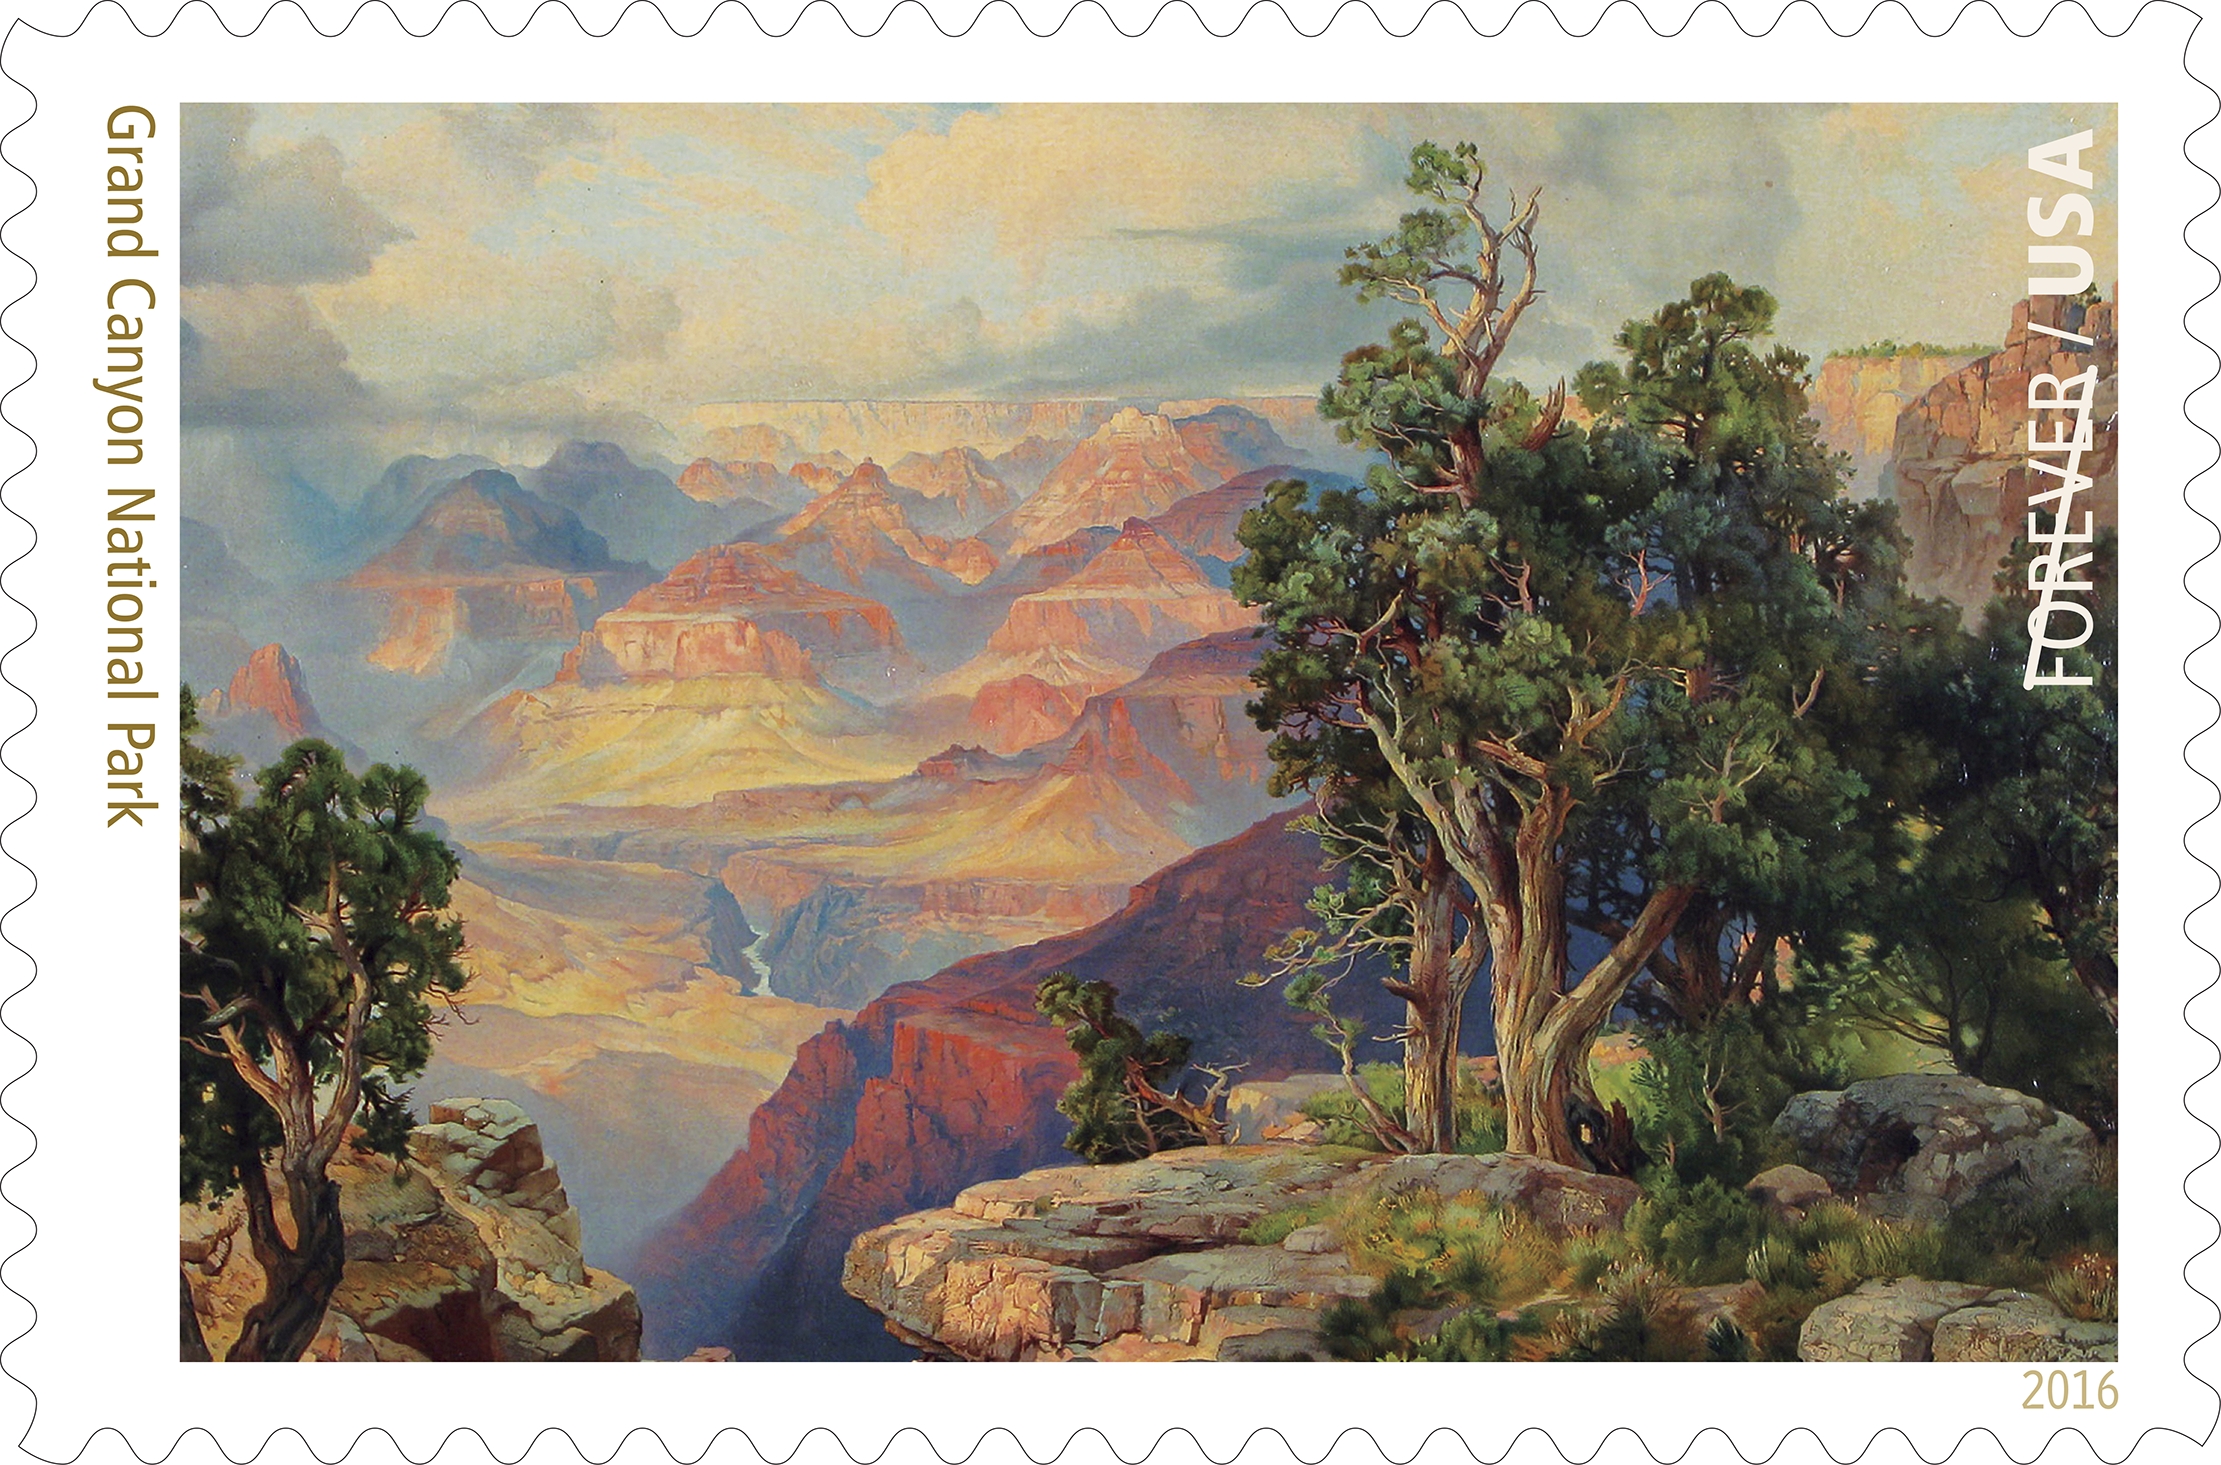 Grand Canyon National Park stamp